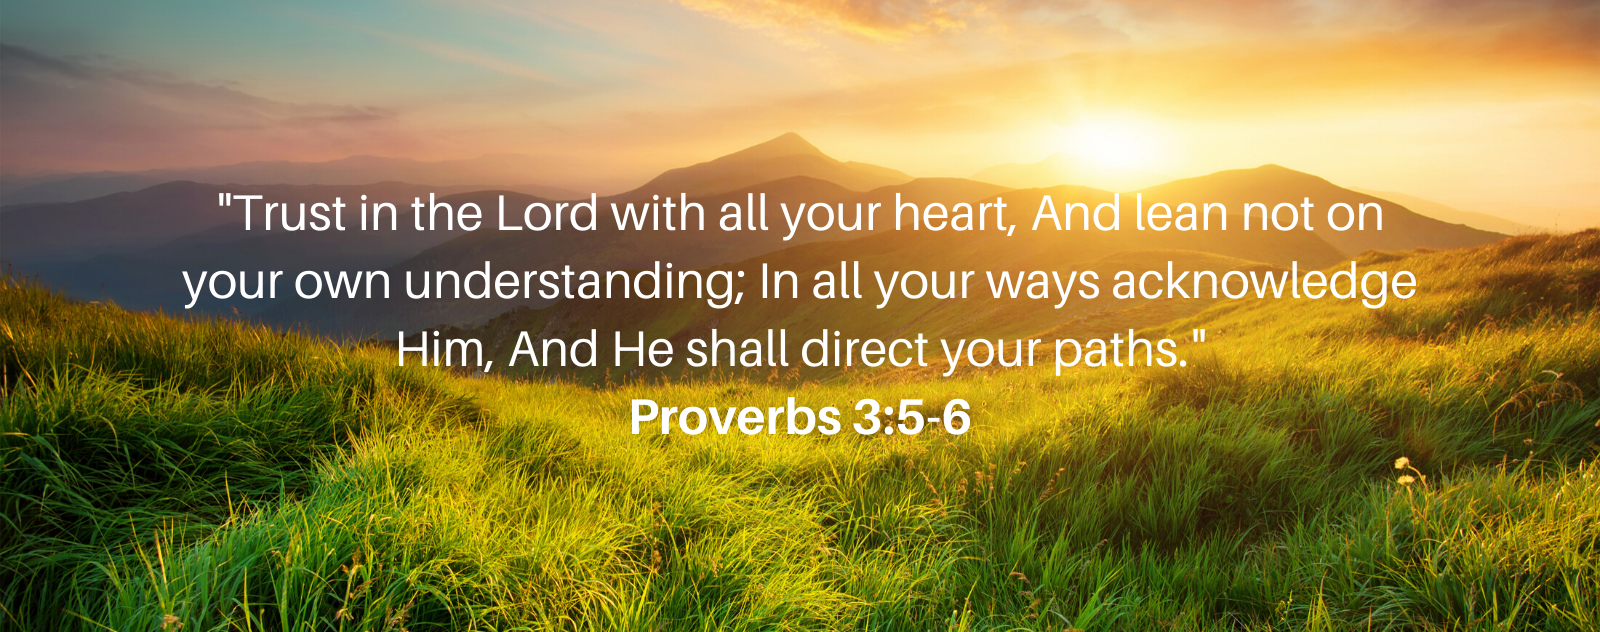 proverbs_3_5_6_verse.png